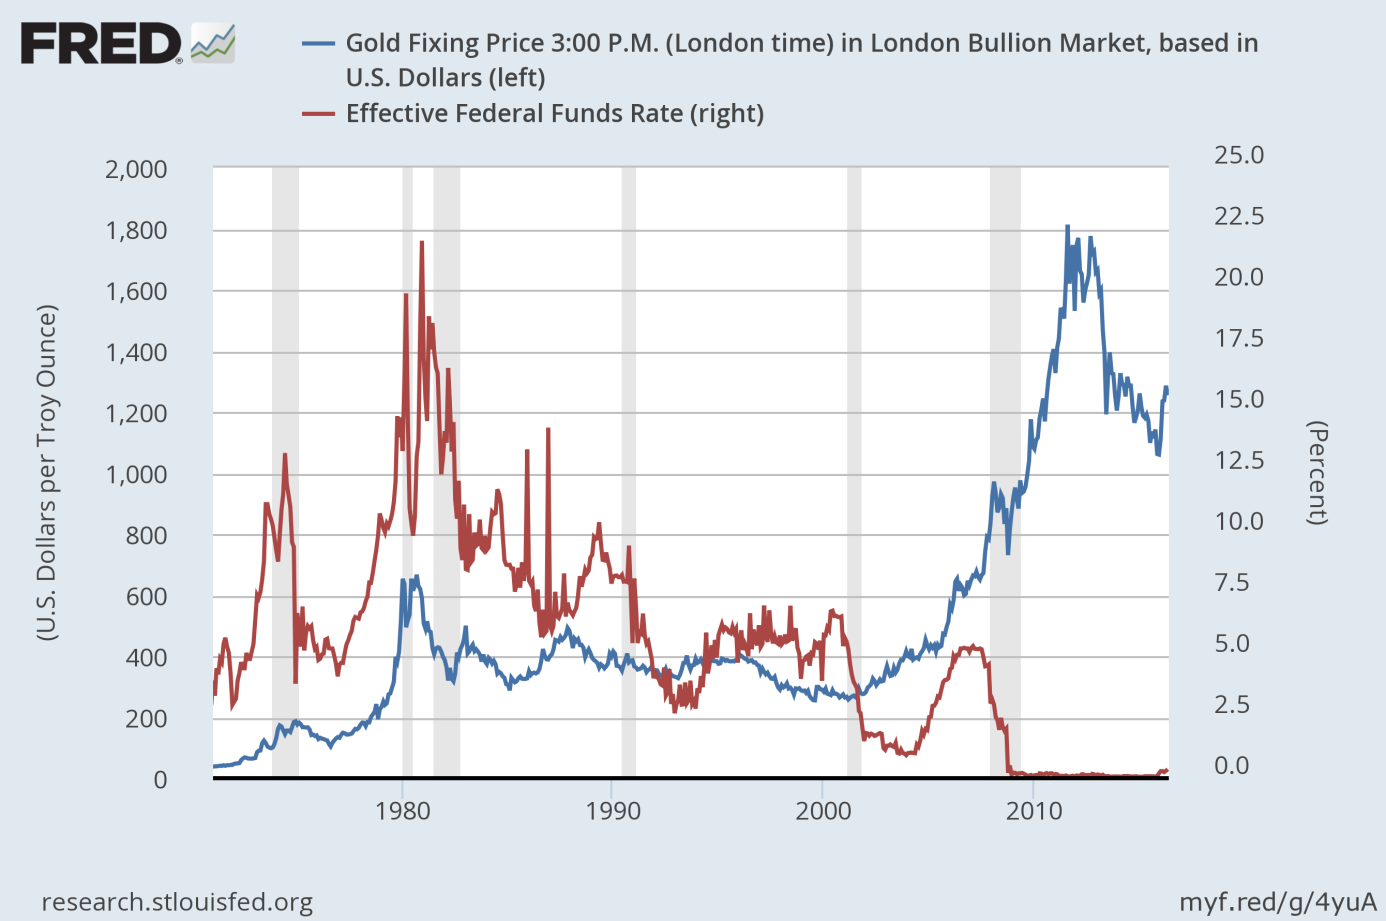 Gold Price vs. Federal Funds Rate